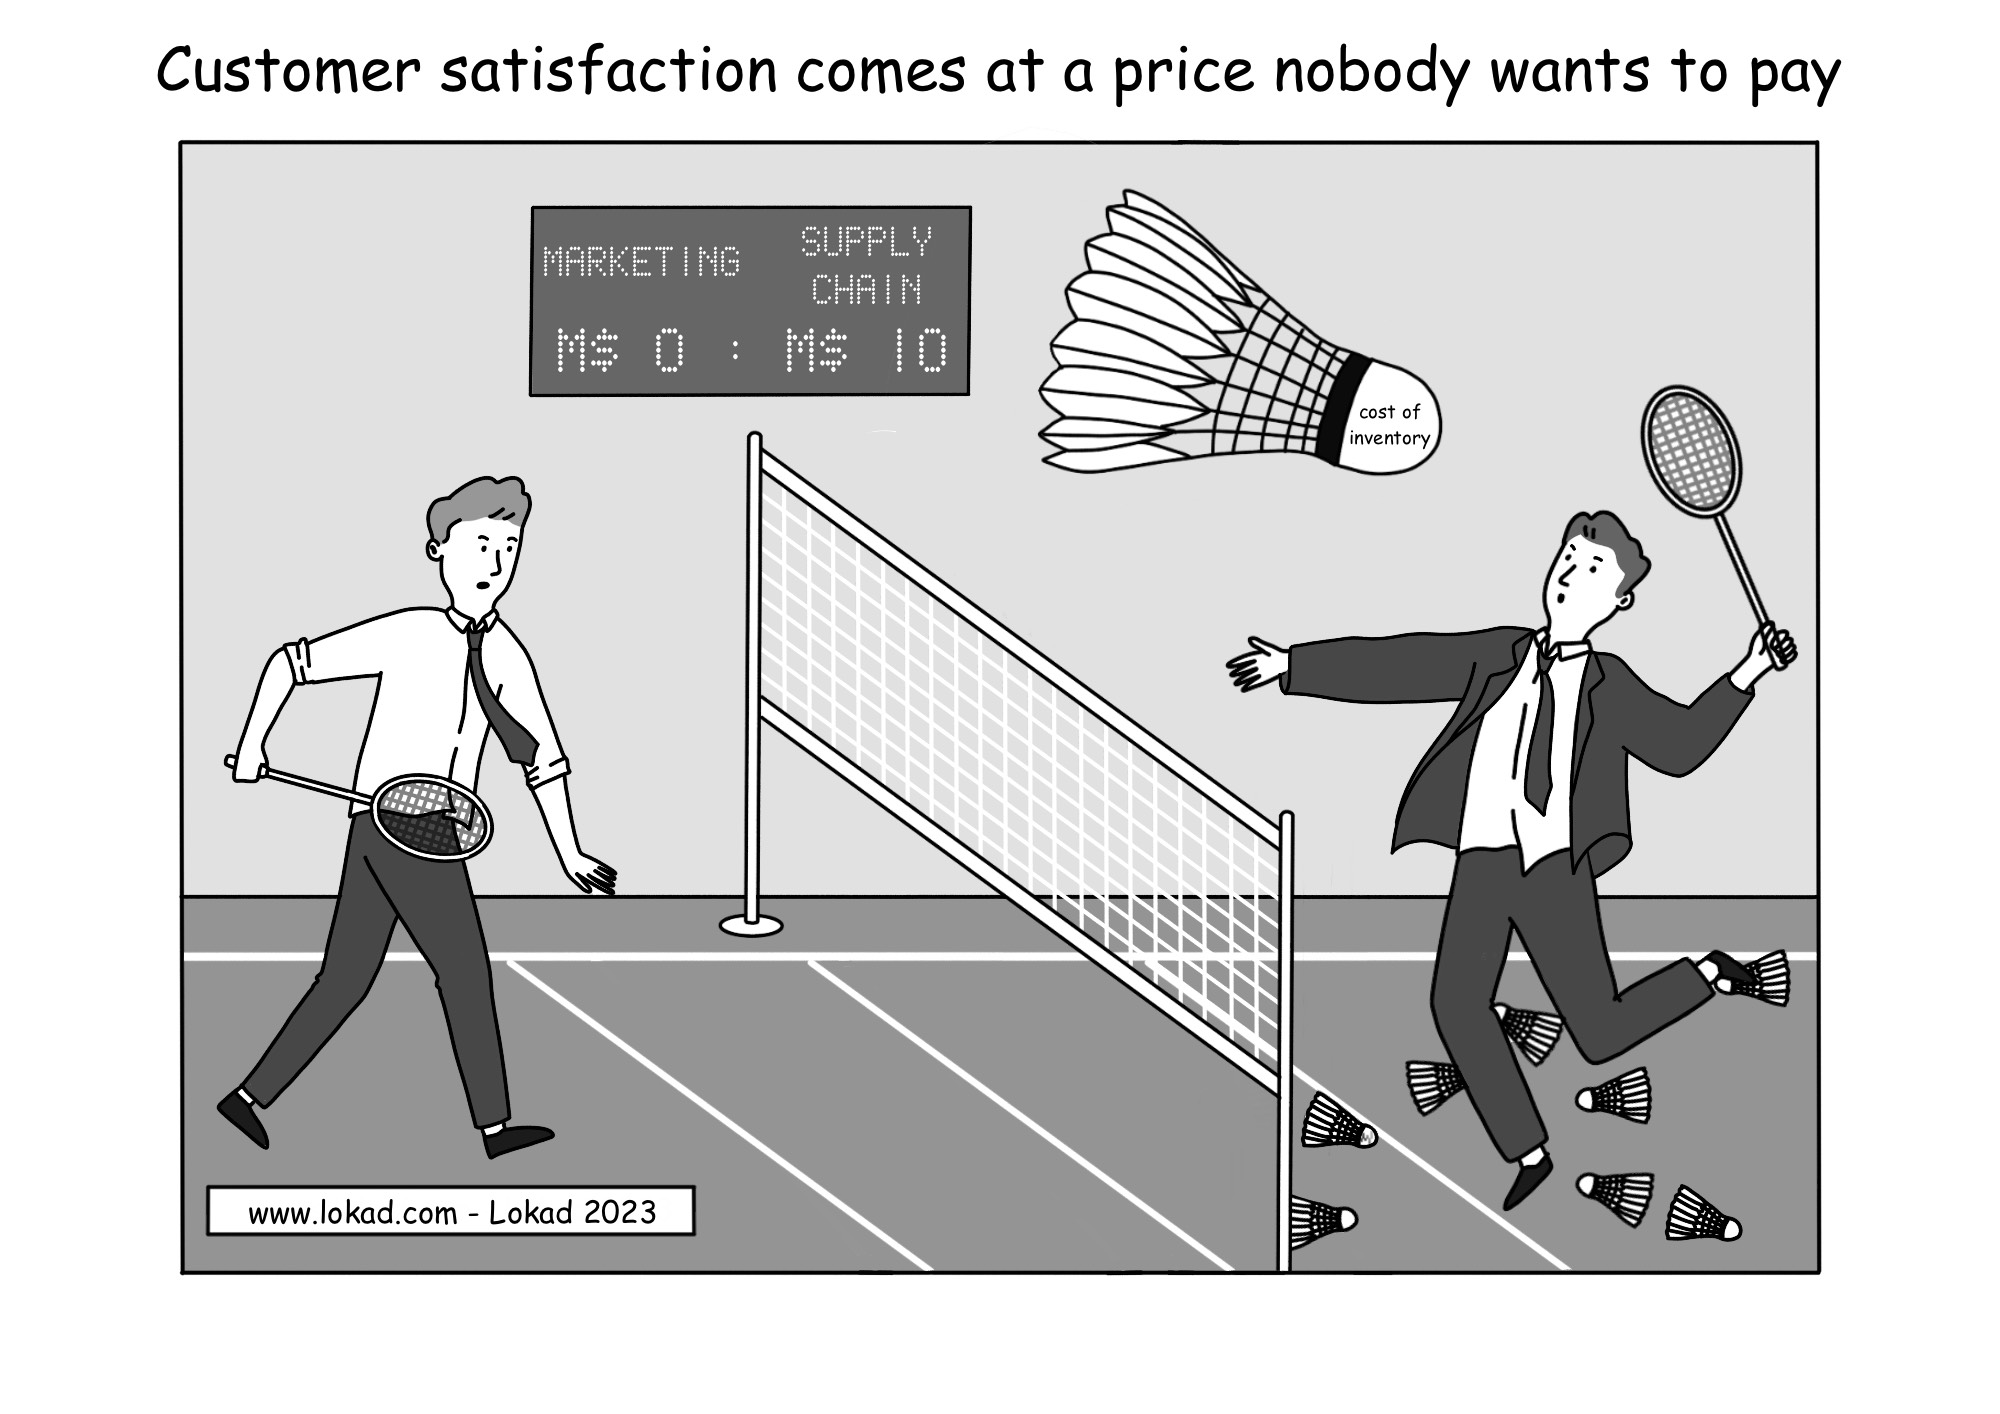 A supply chain comic designed by Lokad. Headline: Customer satisfaction comes at a price nobody wants to pay. Marketing and supply chain heads are playing badminton. Supply chain head is loosing with many shuttlecocks on the ground. One shuttlecock is in the air. It has enormous size and sign cost of inventory. Score table shows that supply chain has to pay all the costs.